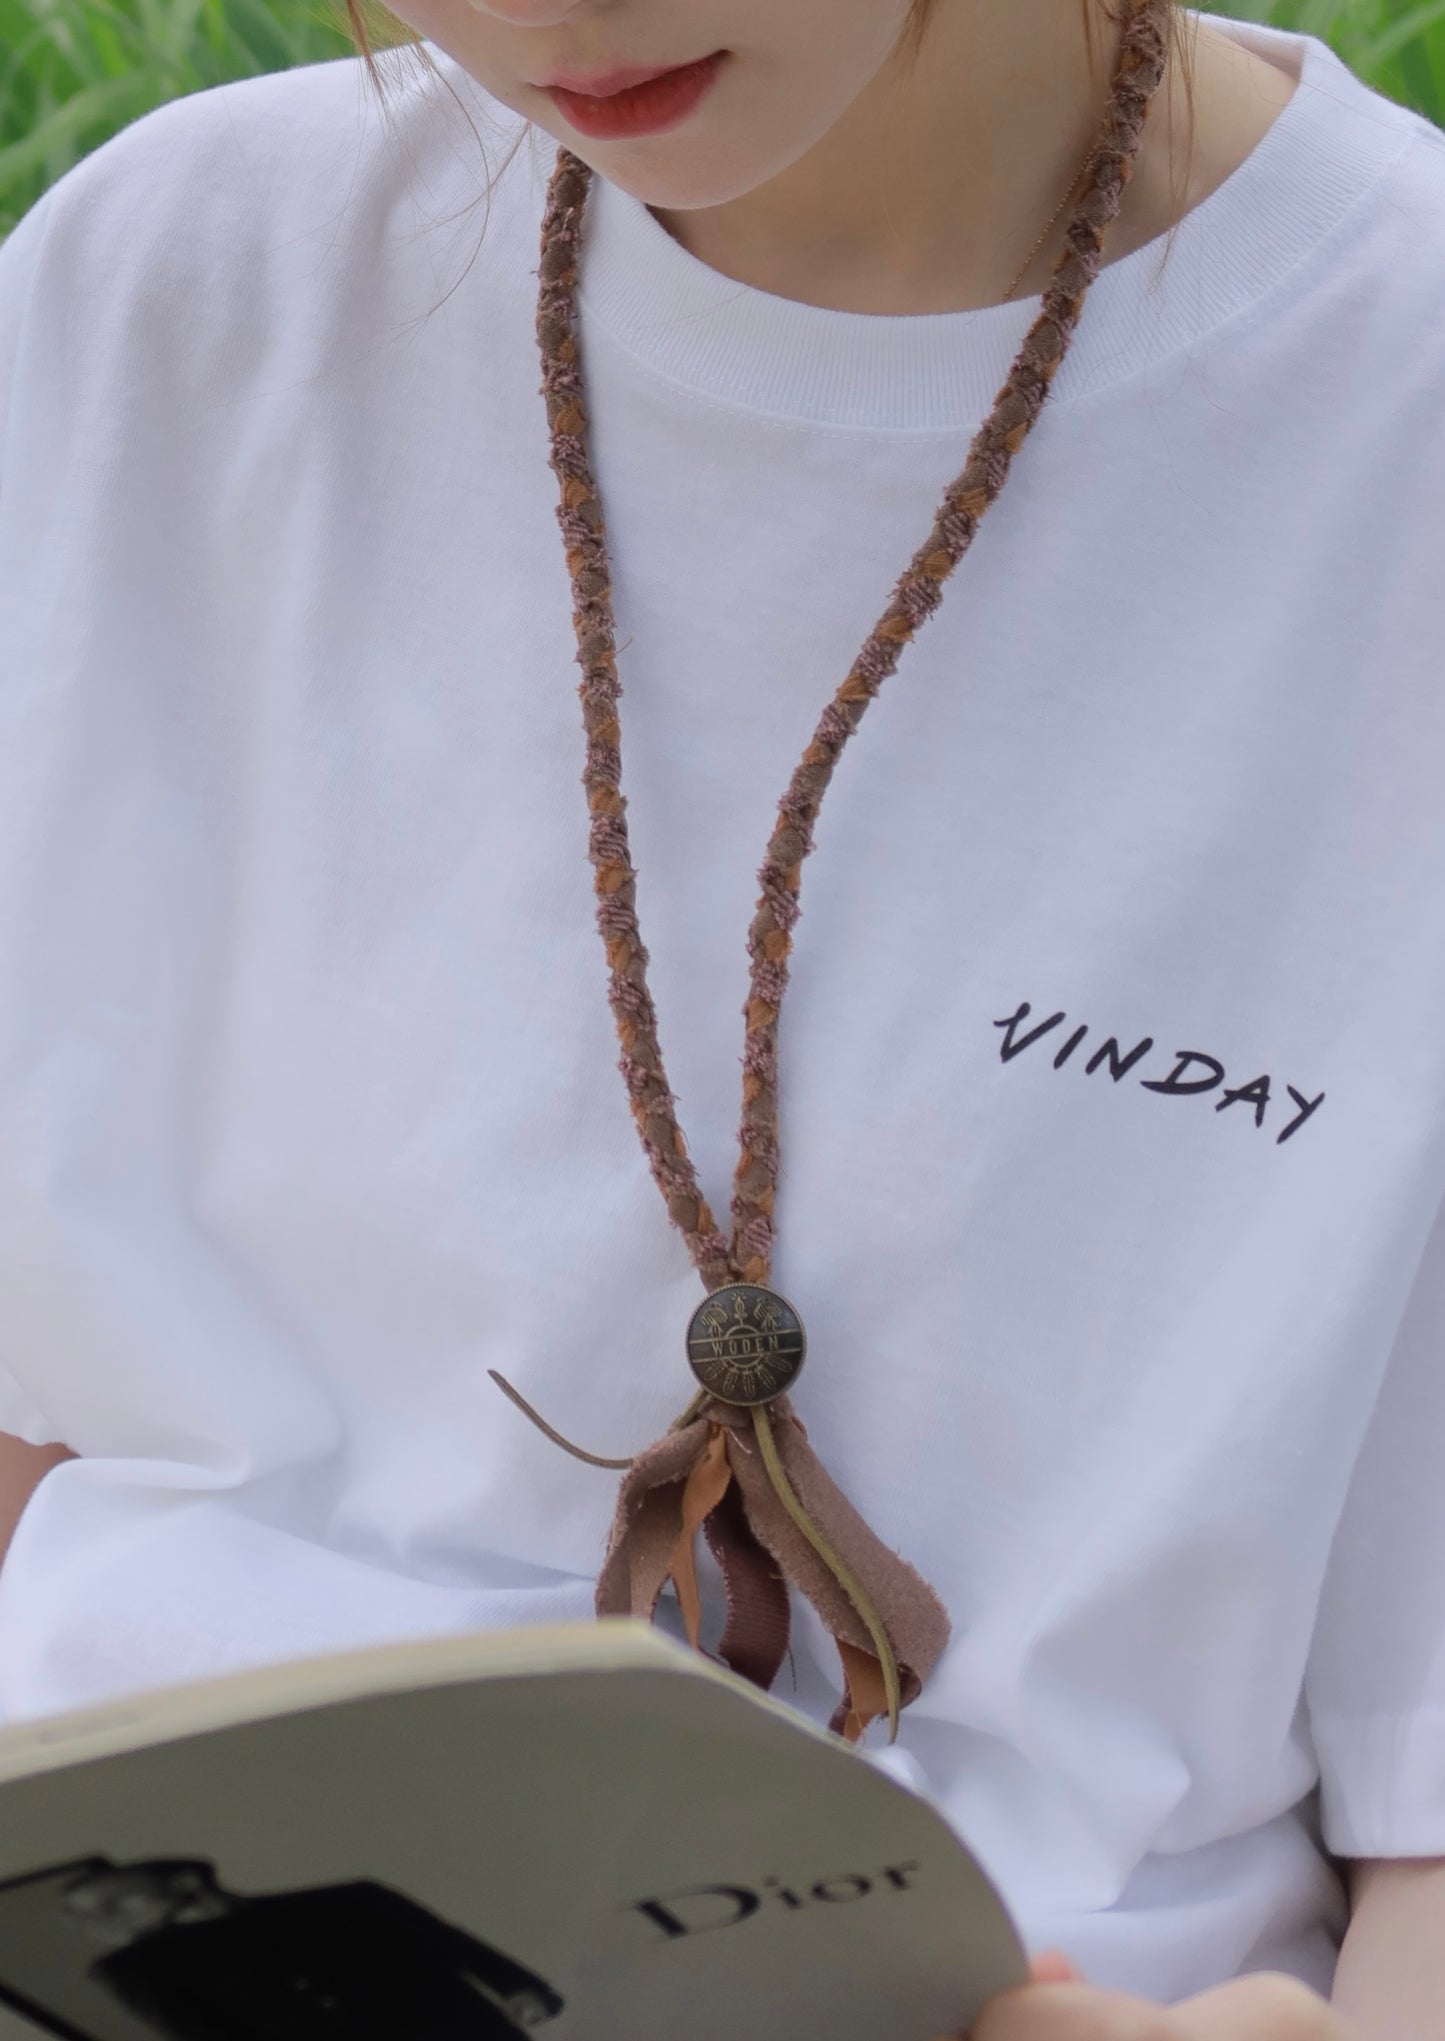 Peep_Projects x Vinday 2022 S/S Camping & Chilling Tee